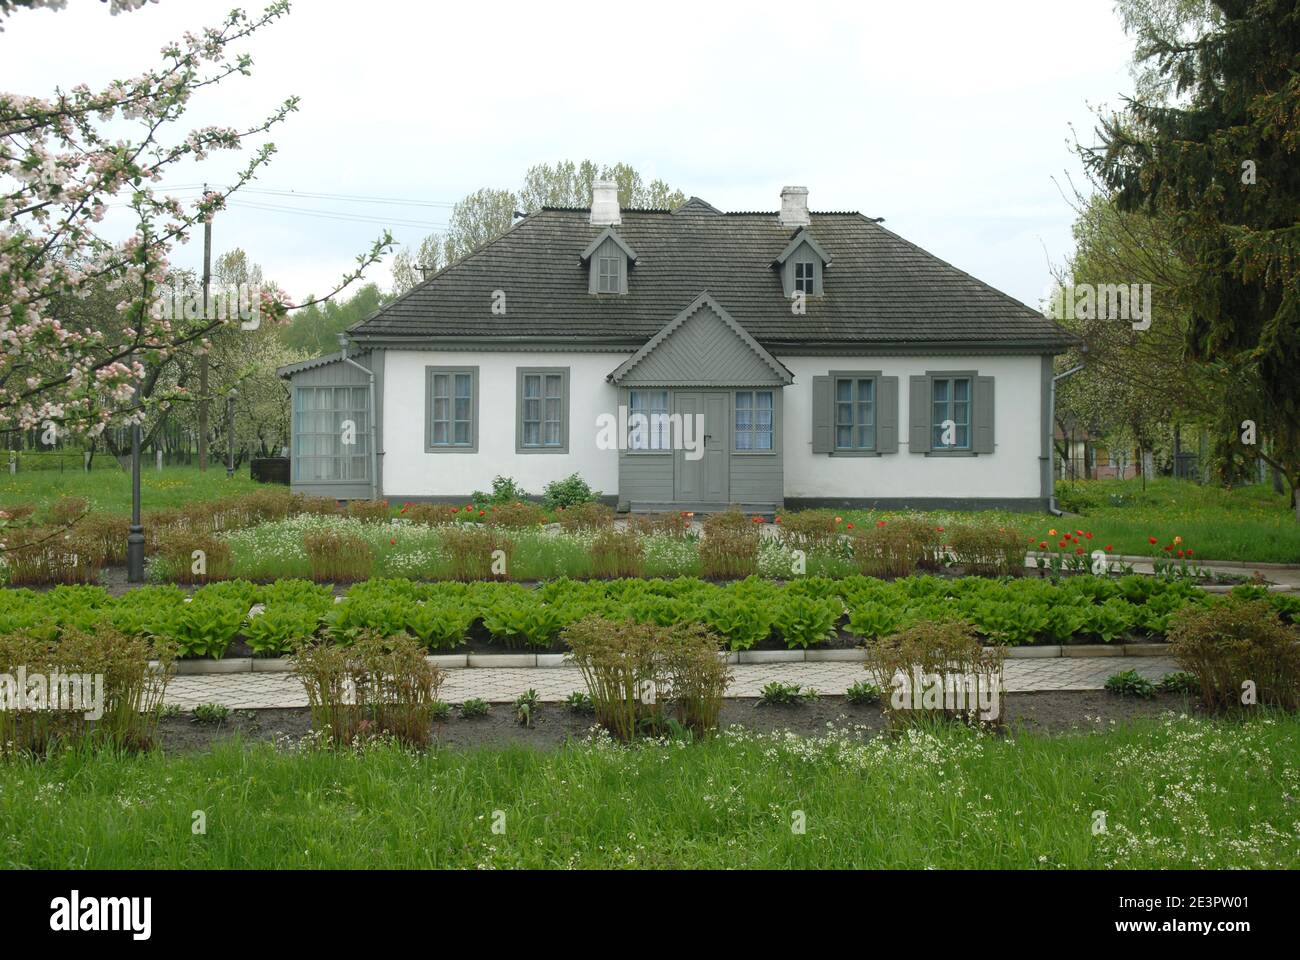 Grey house of Kosachy residense in Kolodiazhne. Green lawn in foreground. Stock Photo